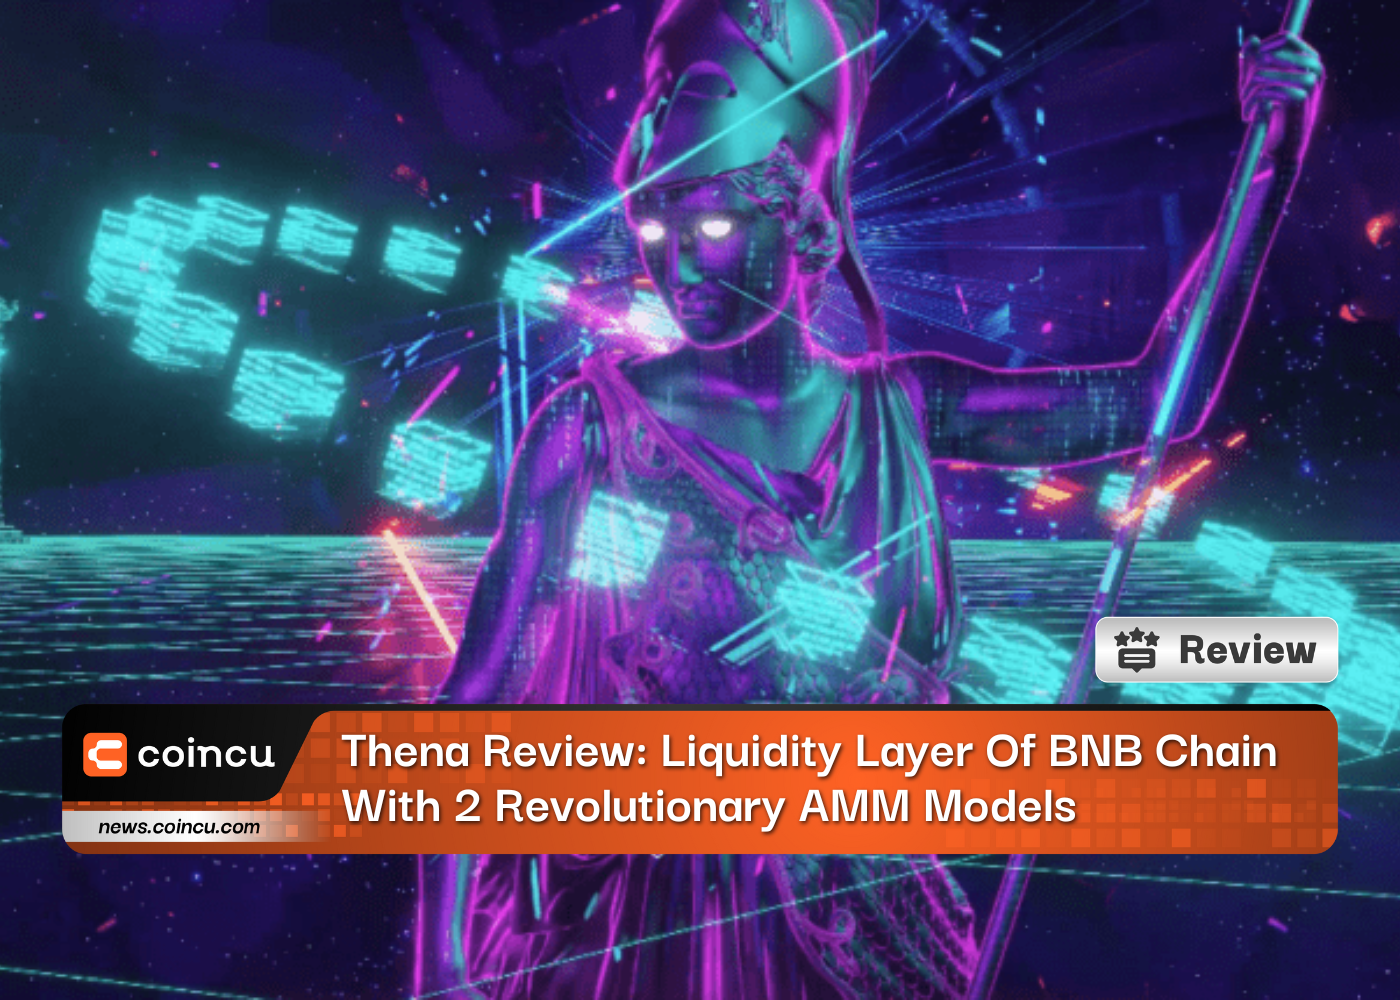 Thena Review: Liquidity Layer Of BNB Chain With 2 Revolutionary AMM Models